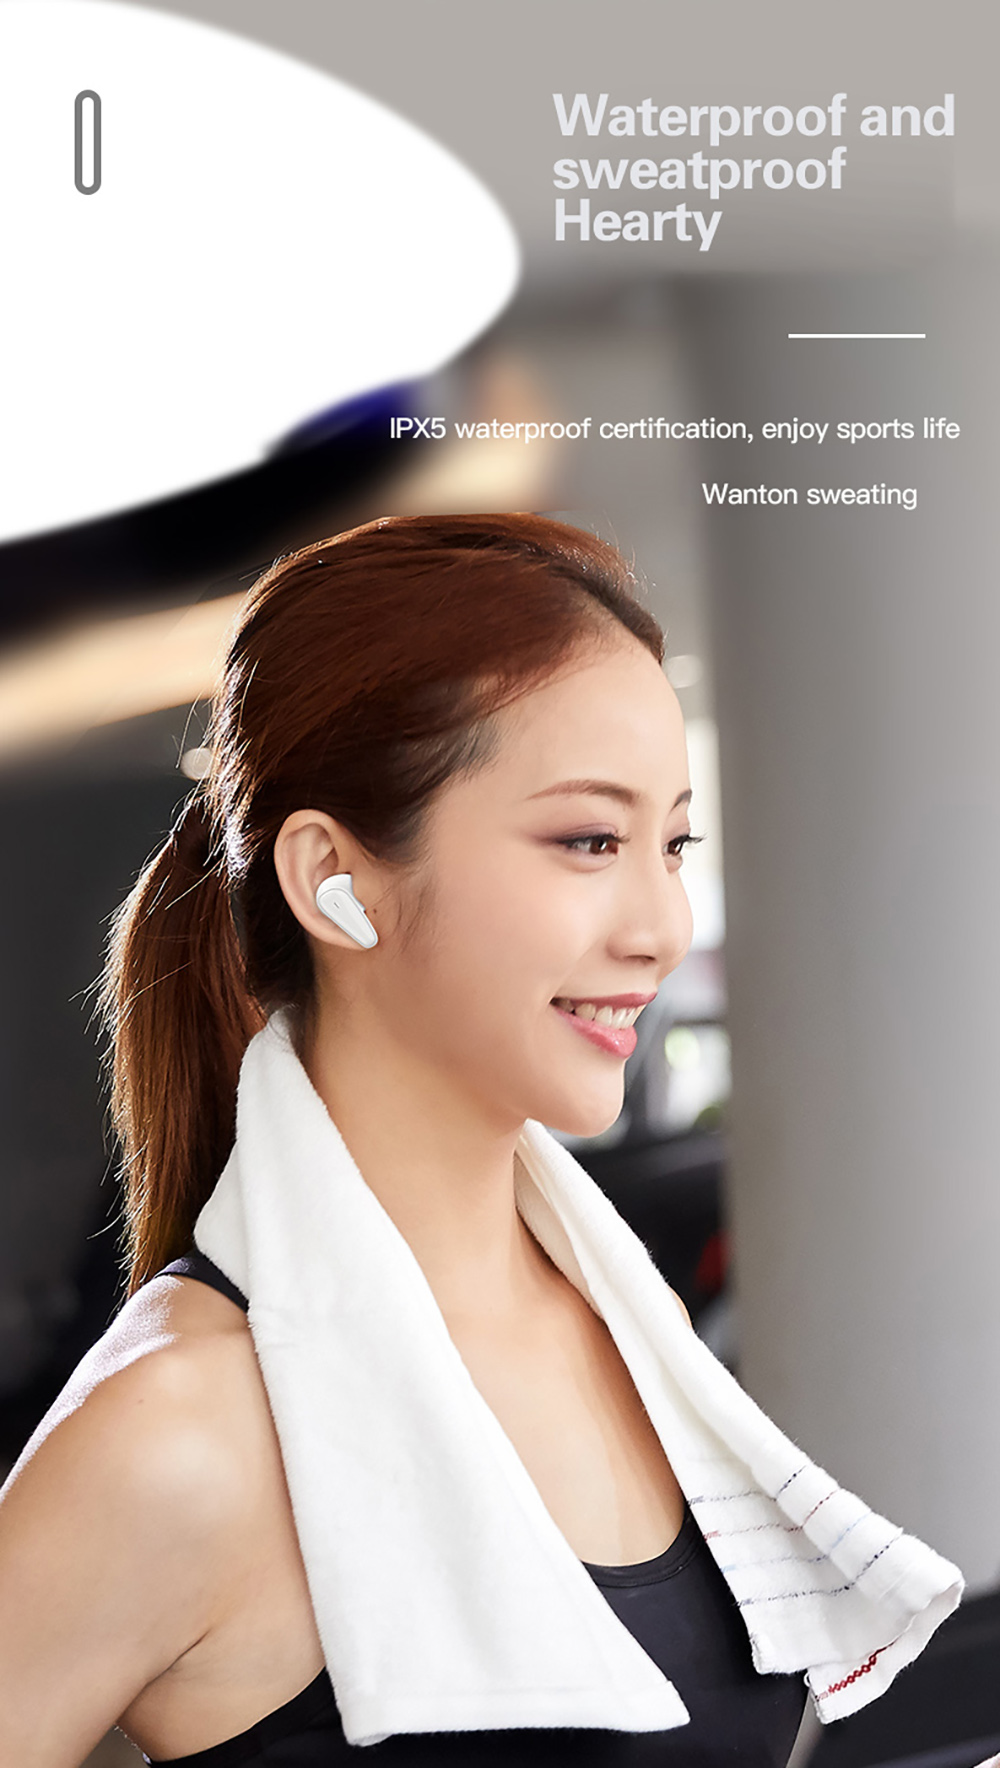 Lenovo-XT95-TWS-bluetooth-50-Earbuds-Headsets-16CM-Ultra-Thin-Touch-Control-Digital-Display-Stereo-H-1882752-12